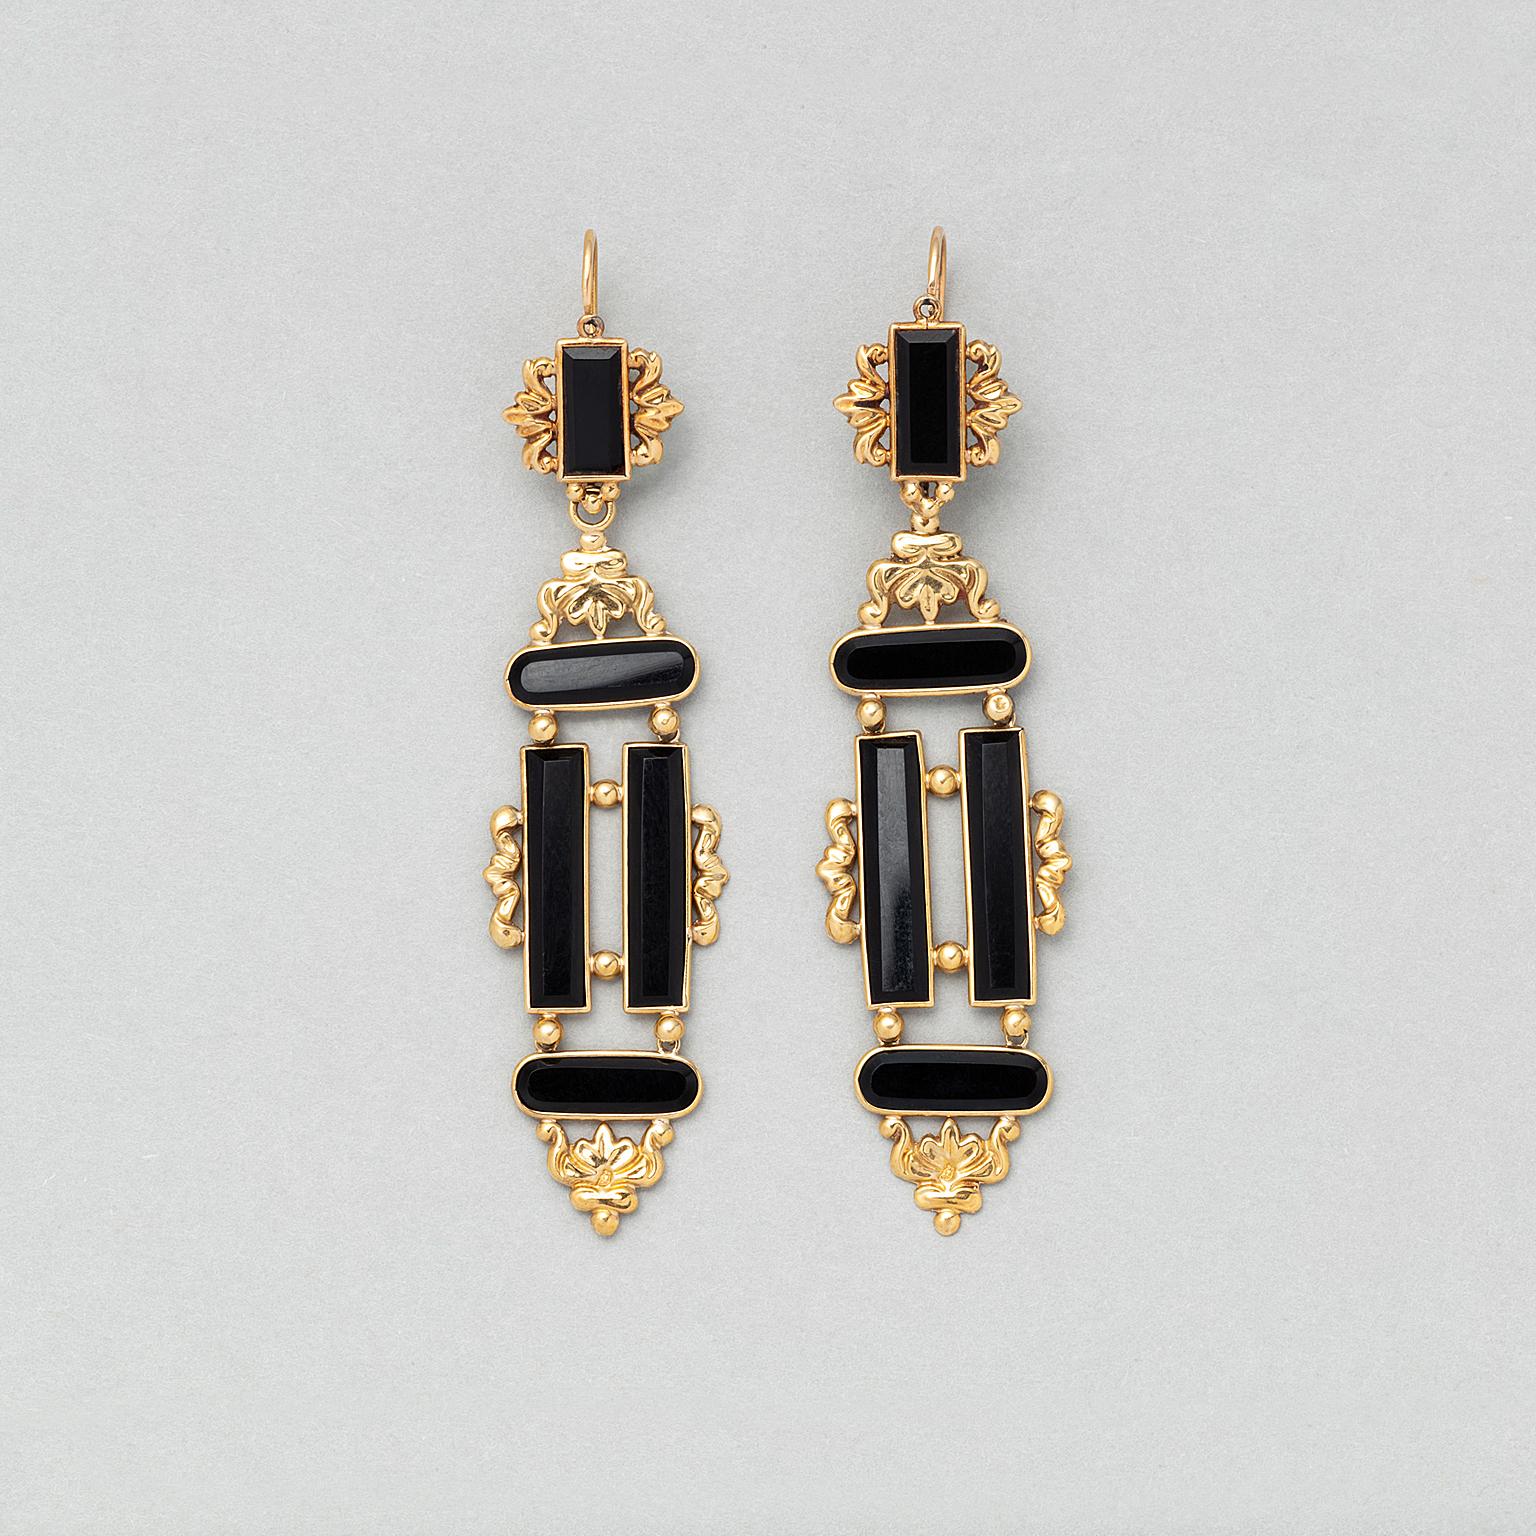 A pair 18 carat gold and onyx - day and night -  earrings, with floral decorations and recantgular onyx plaques, Dutch import mark a boar s head, circa 1840, 1831-1893.

weight: 4.58 gram
dimensions: 6.5 x 1.5 cm